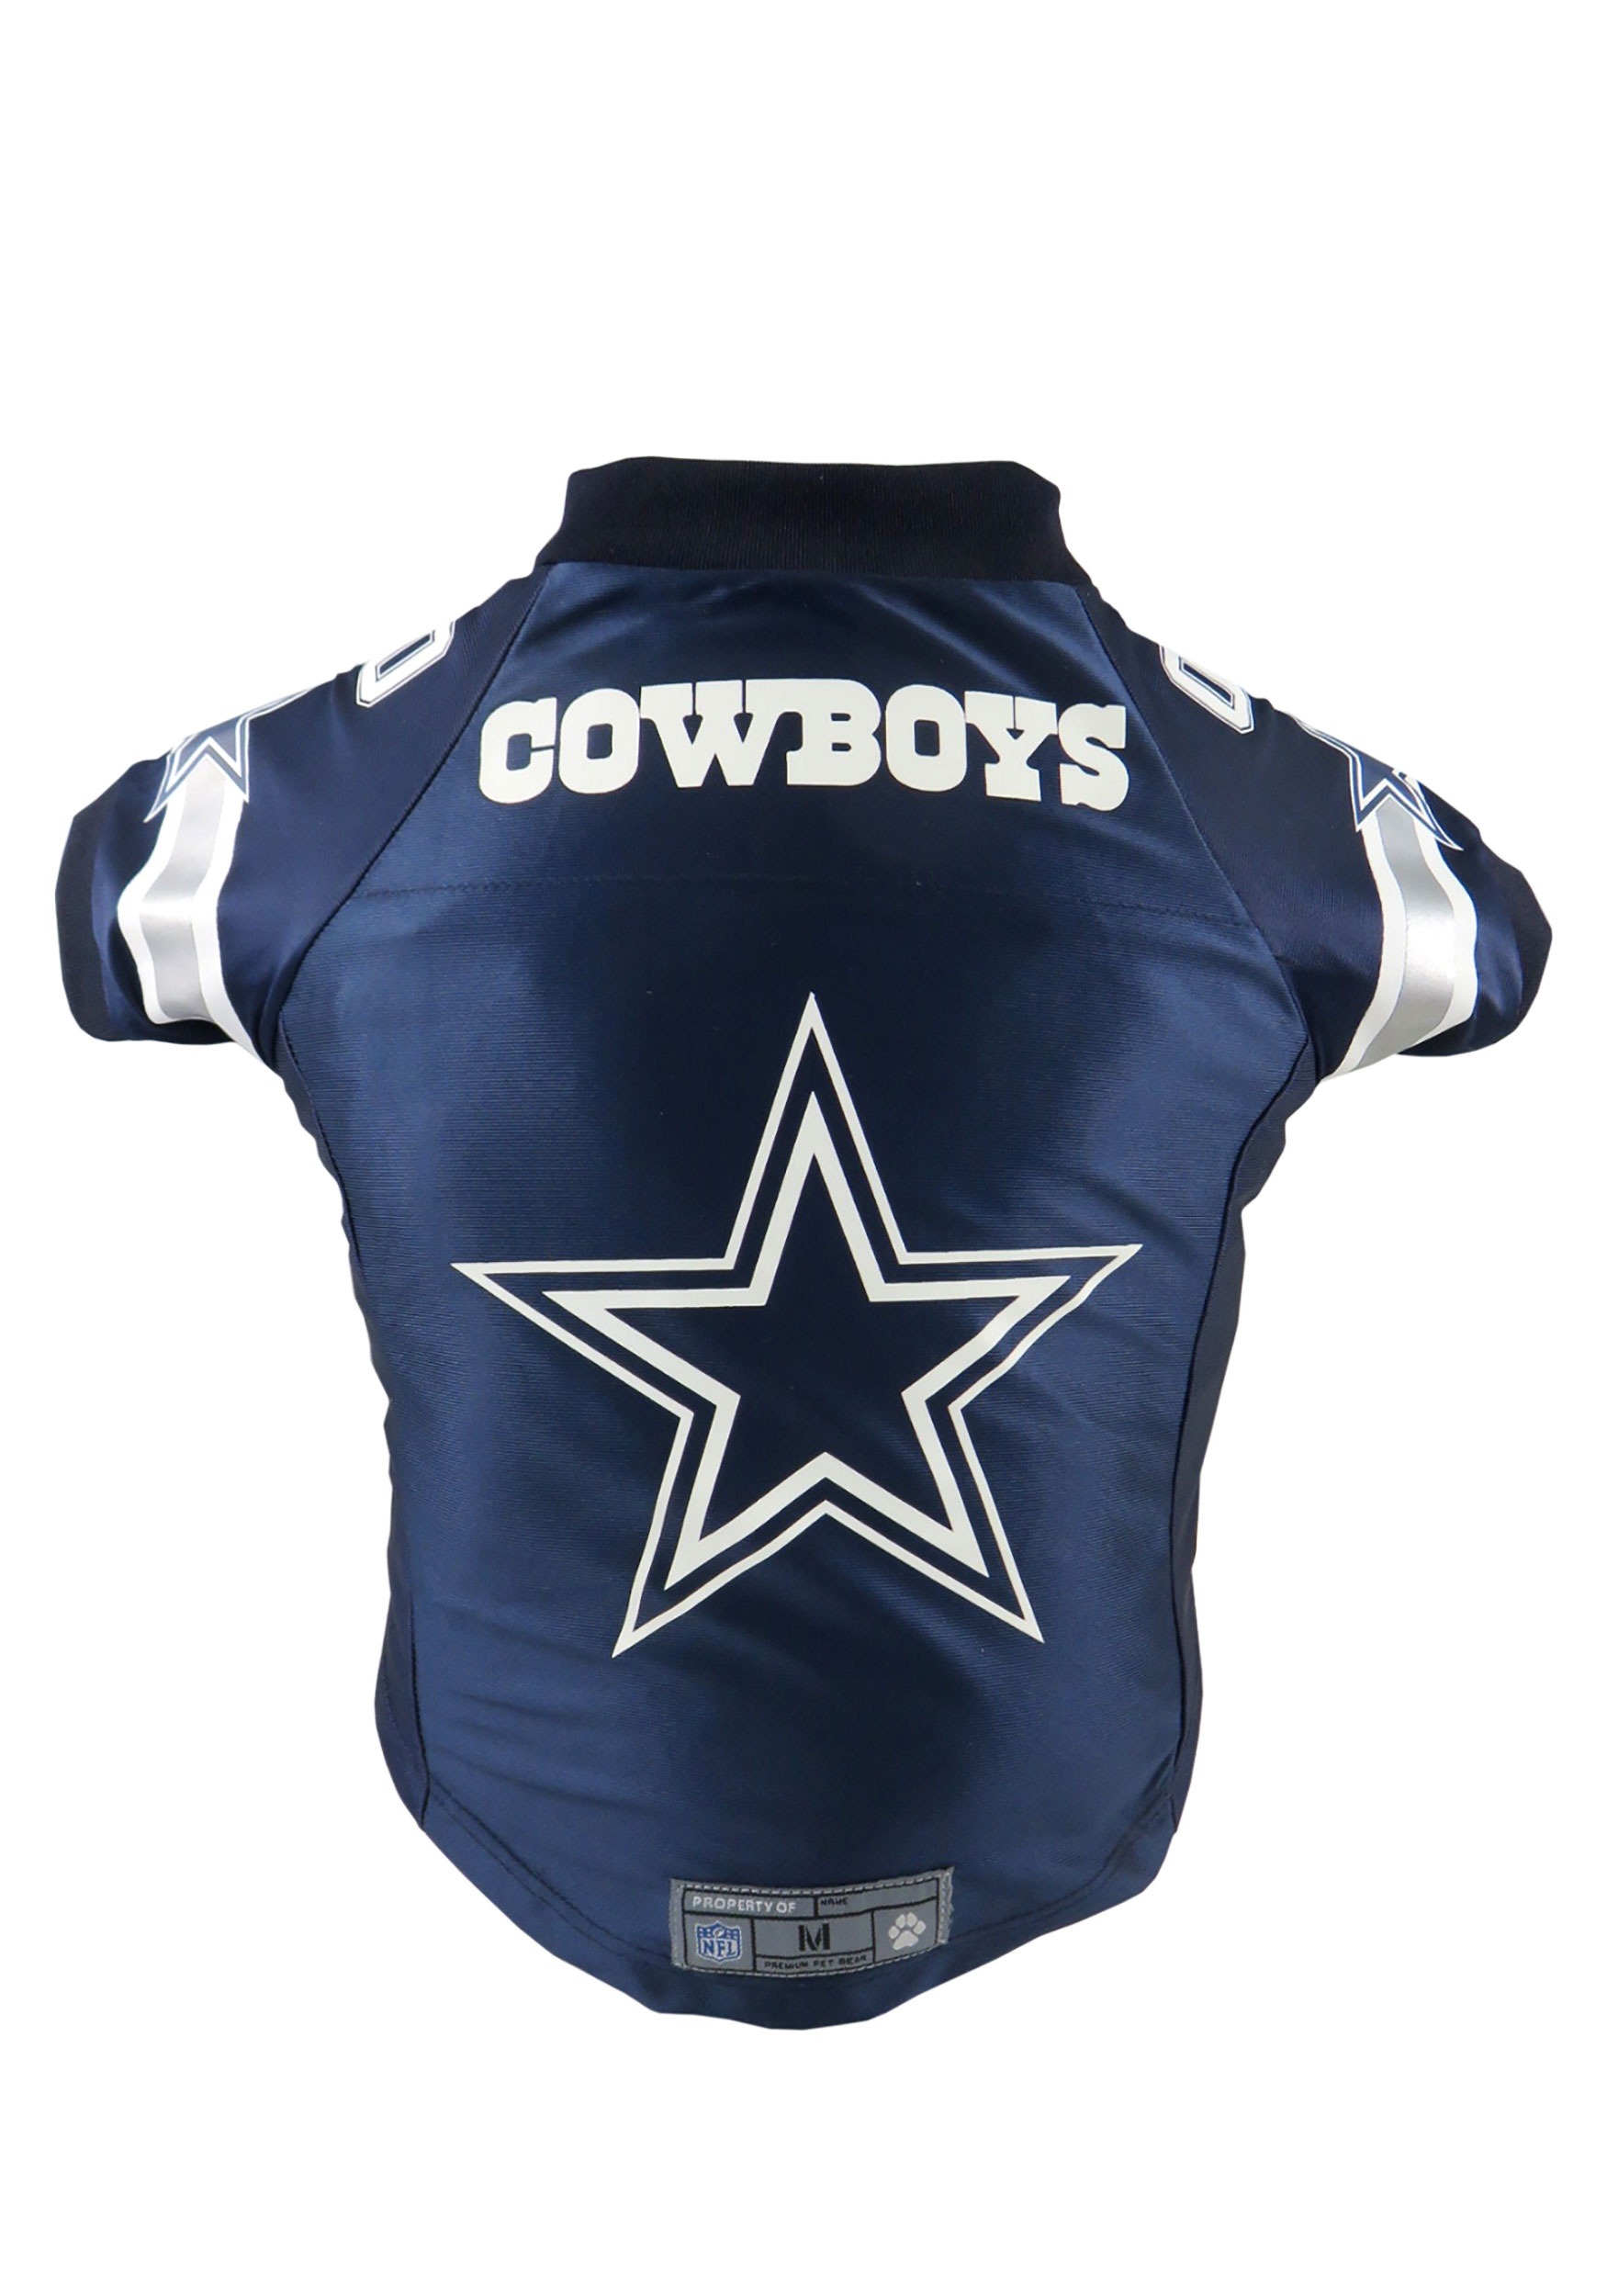 where can i get a dallas cowboys jersey